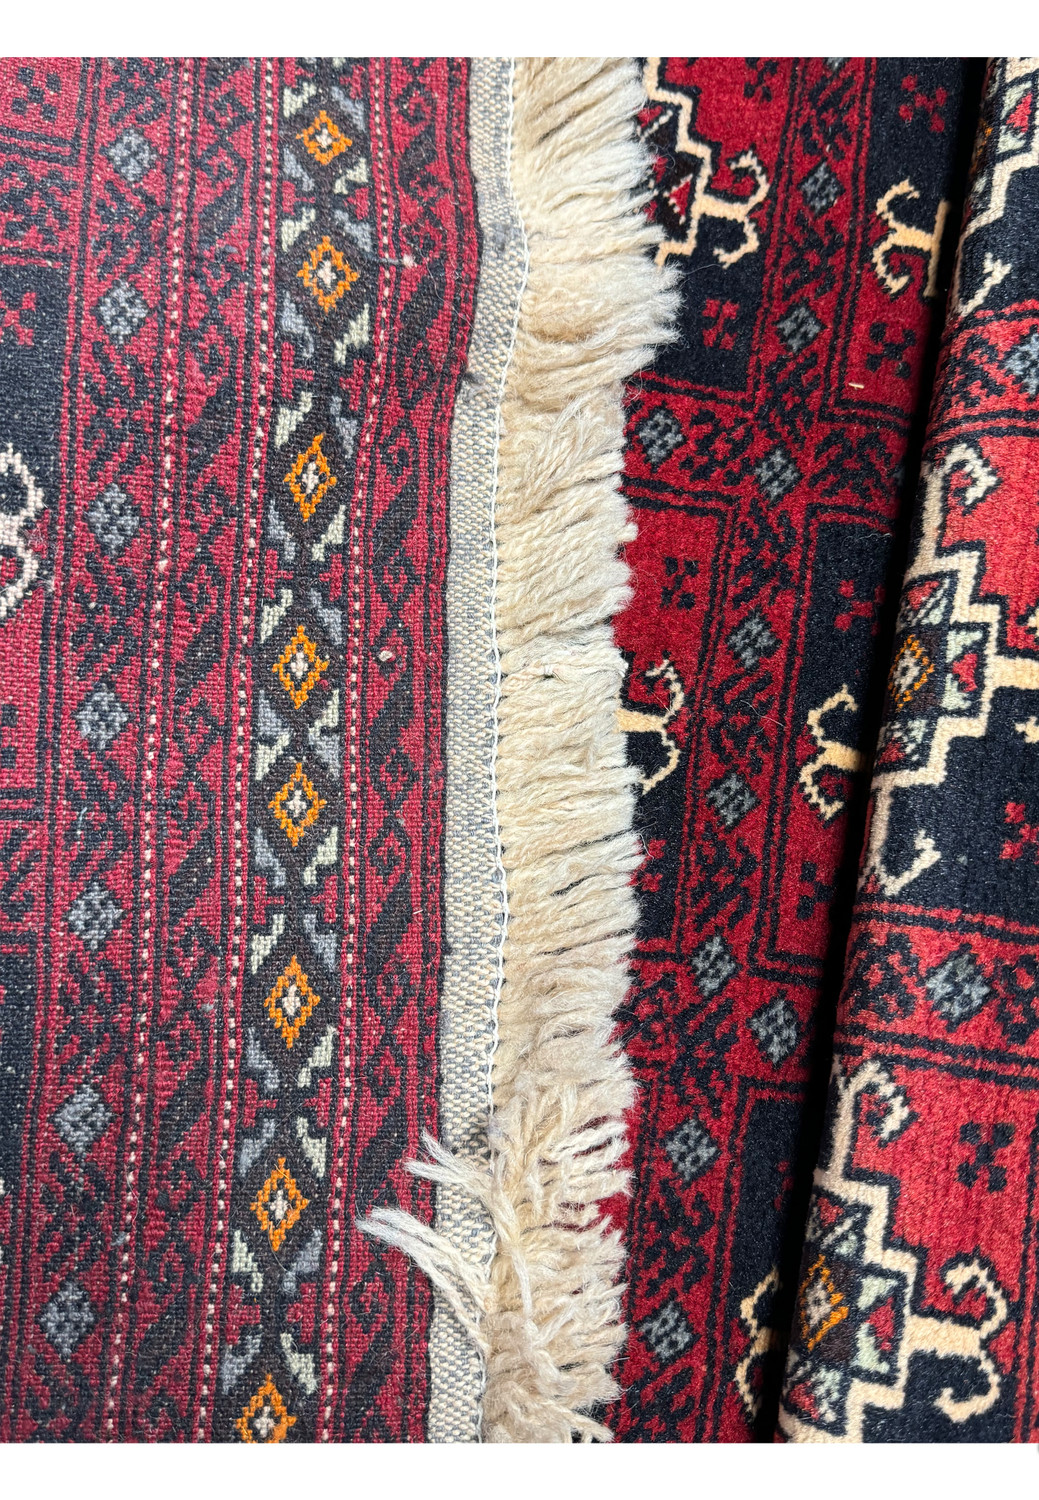 Backside of the 3x5 Baluch rug, showing its thickness and the edge finishing, demonstrating the rug's sturdy construction.